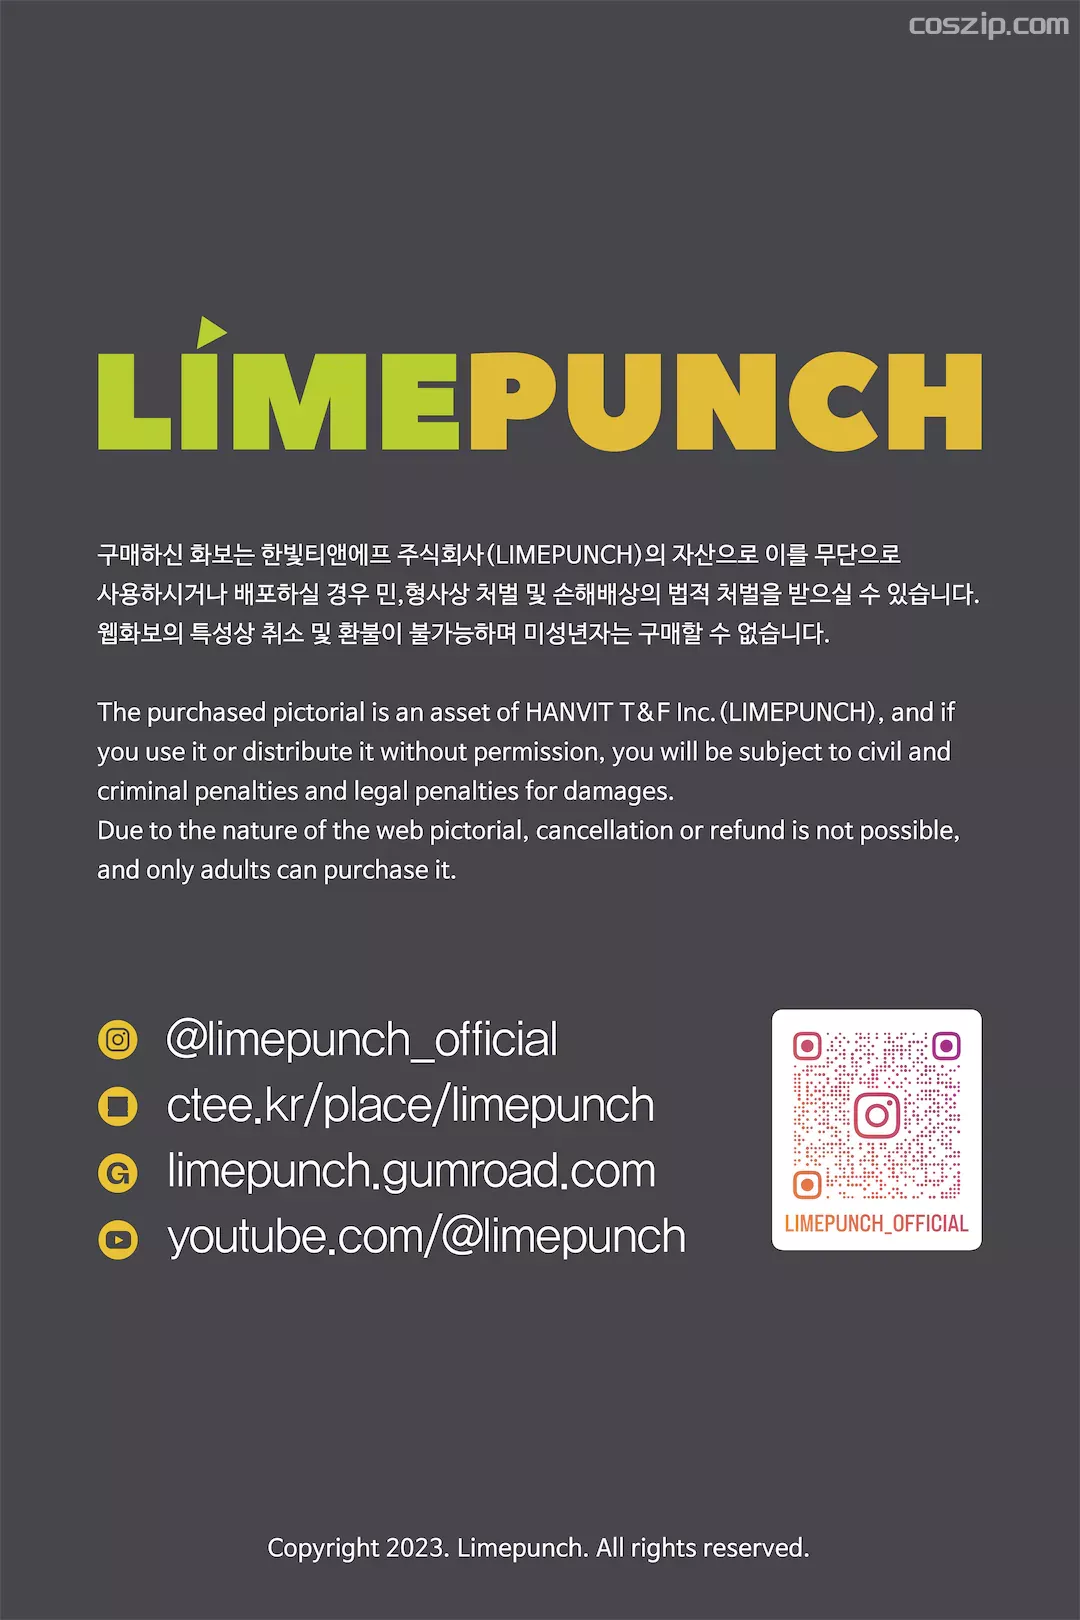 LimePunch-Jungmi-Vol.1-Relaxation-coszip.com-095